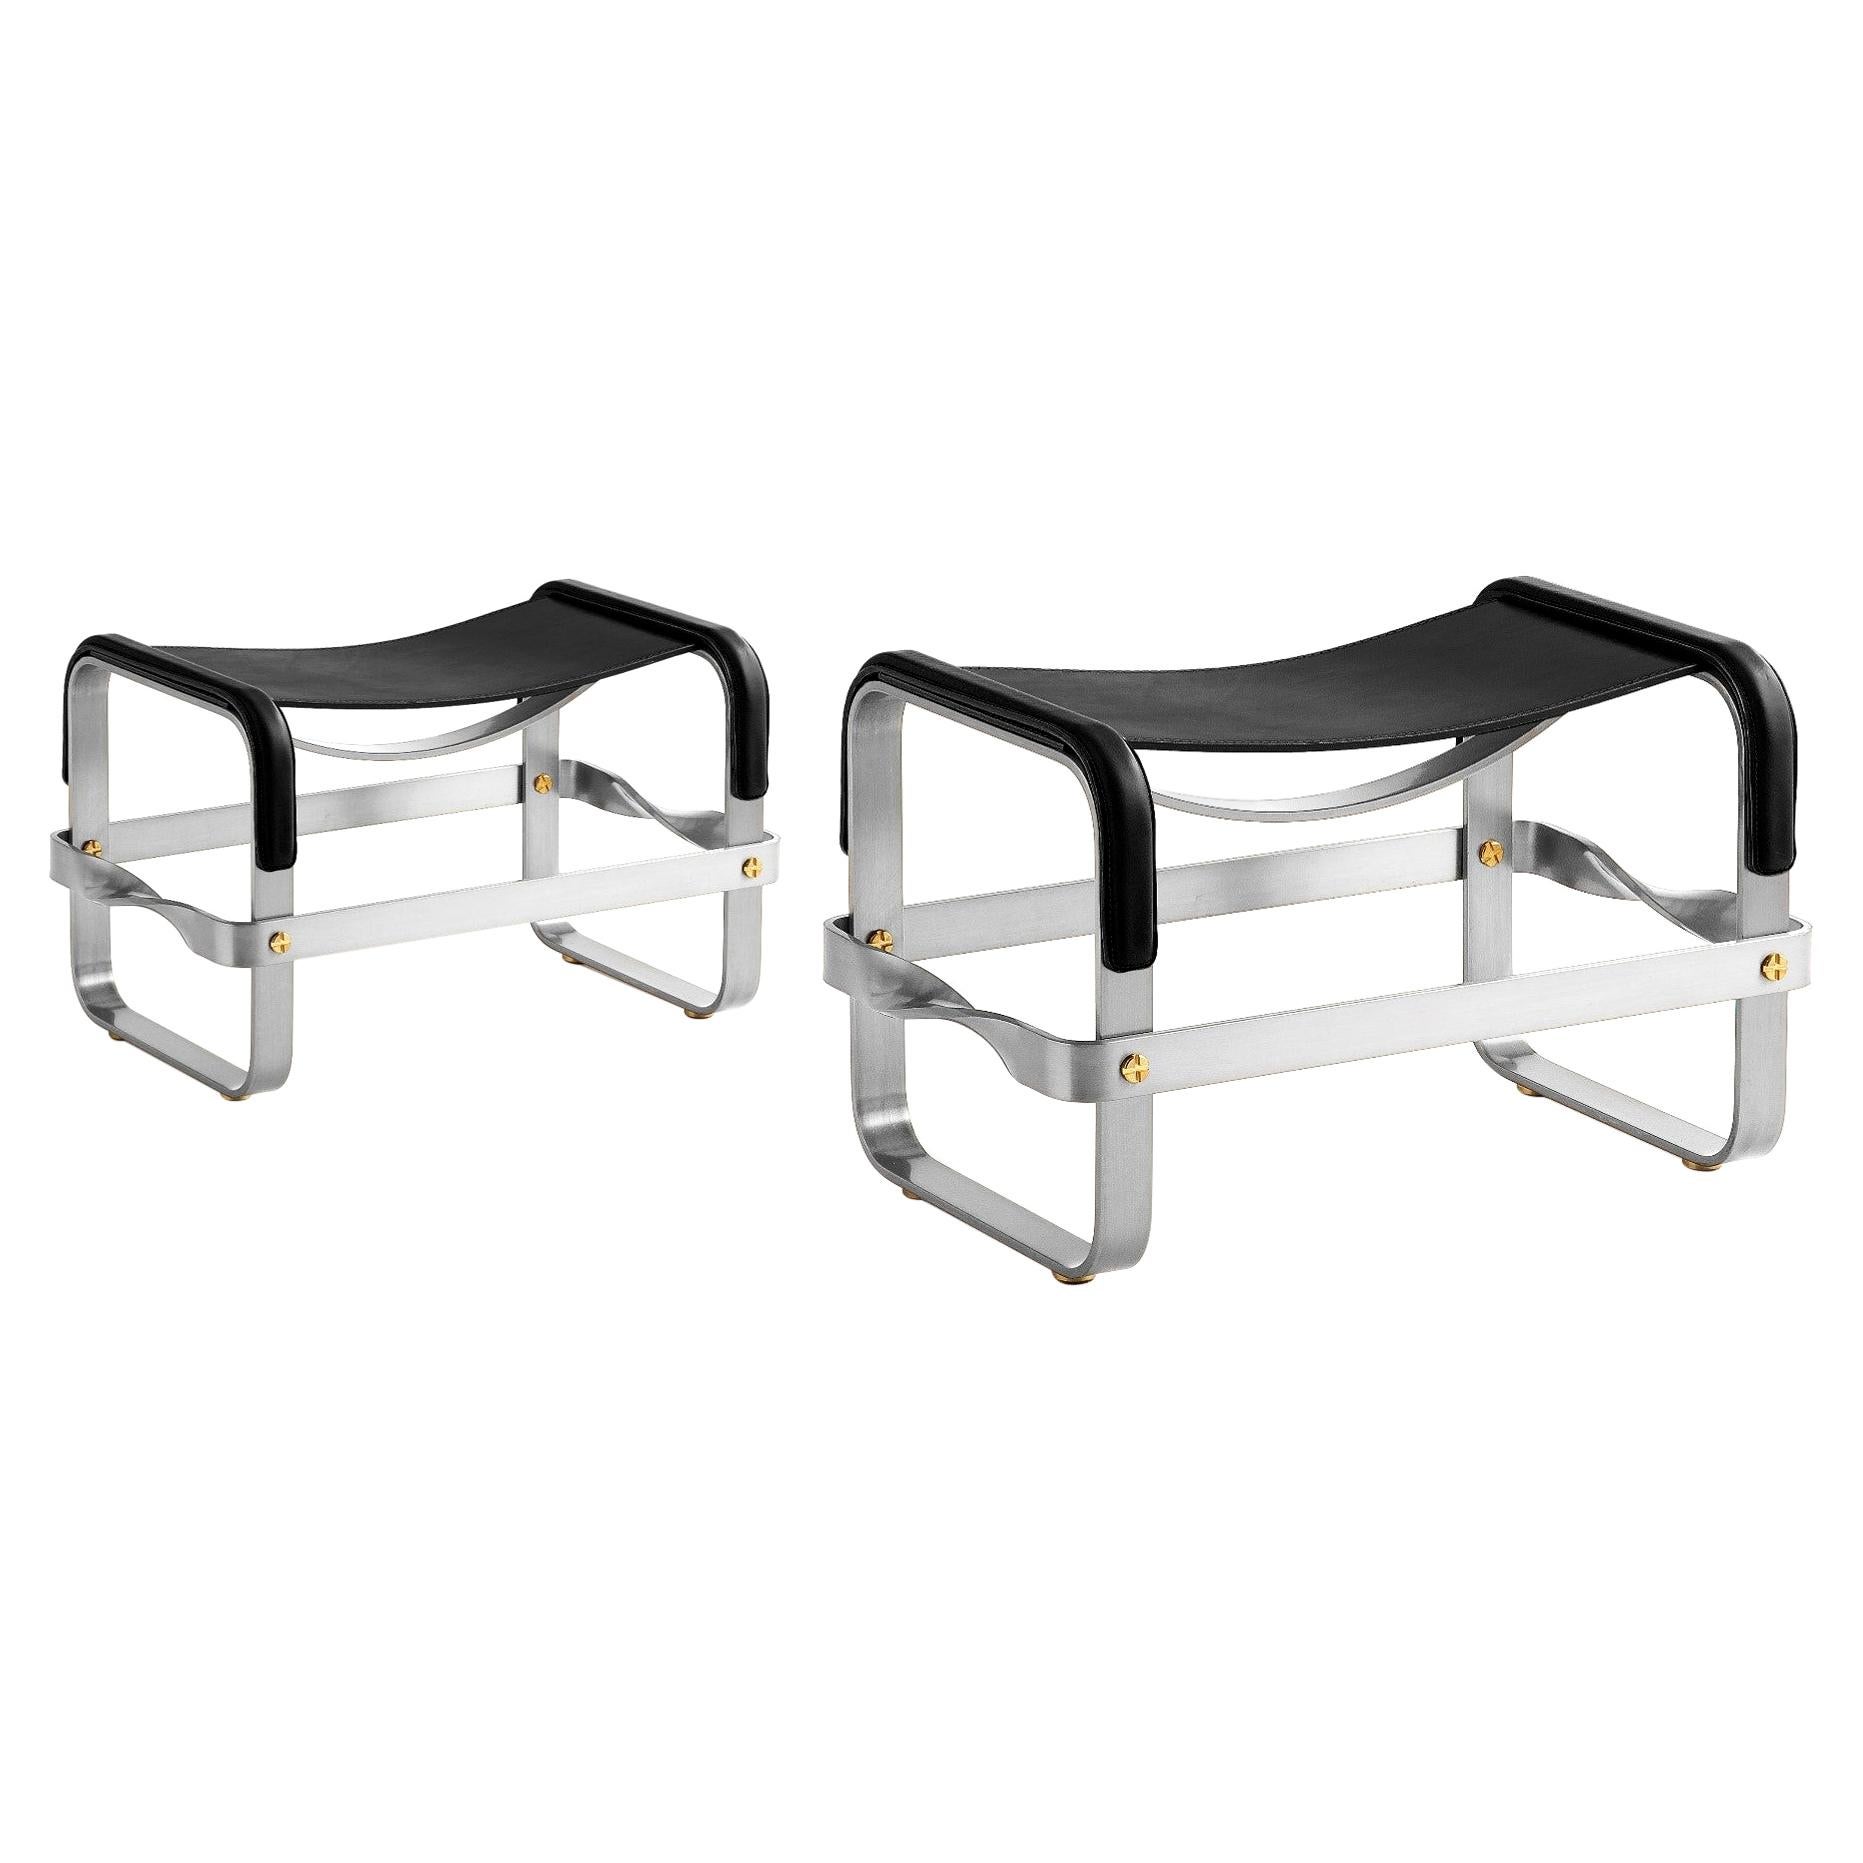 Set of 2 Footstool Old Silver Steel & Black Leather, Contemporary Style For Sale